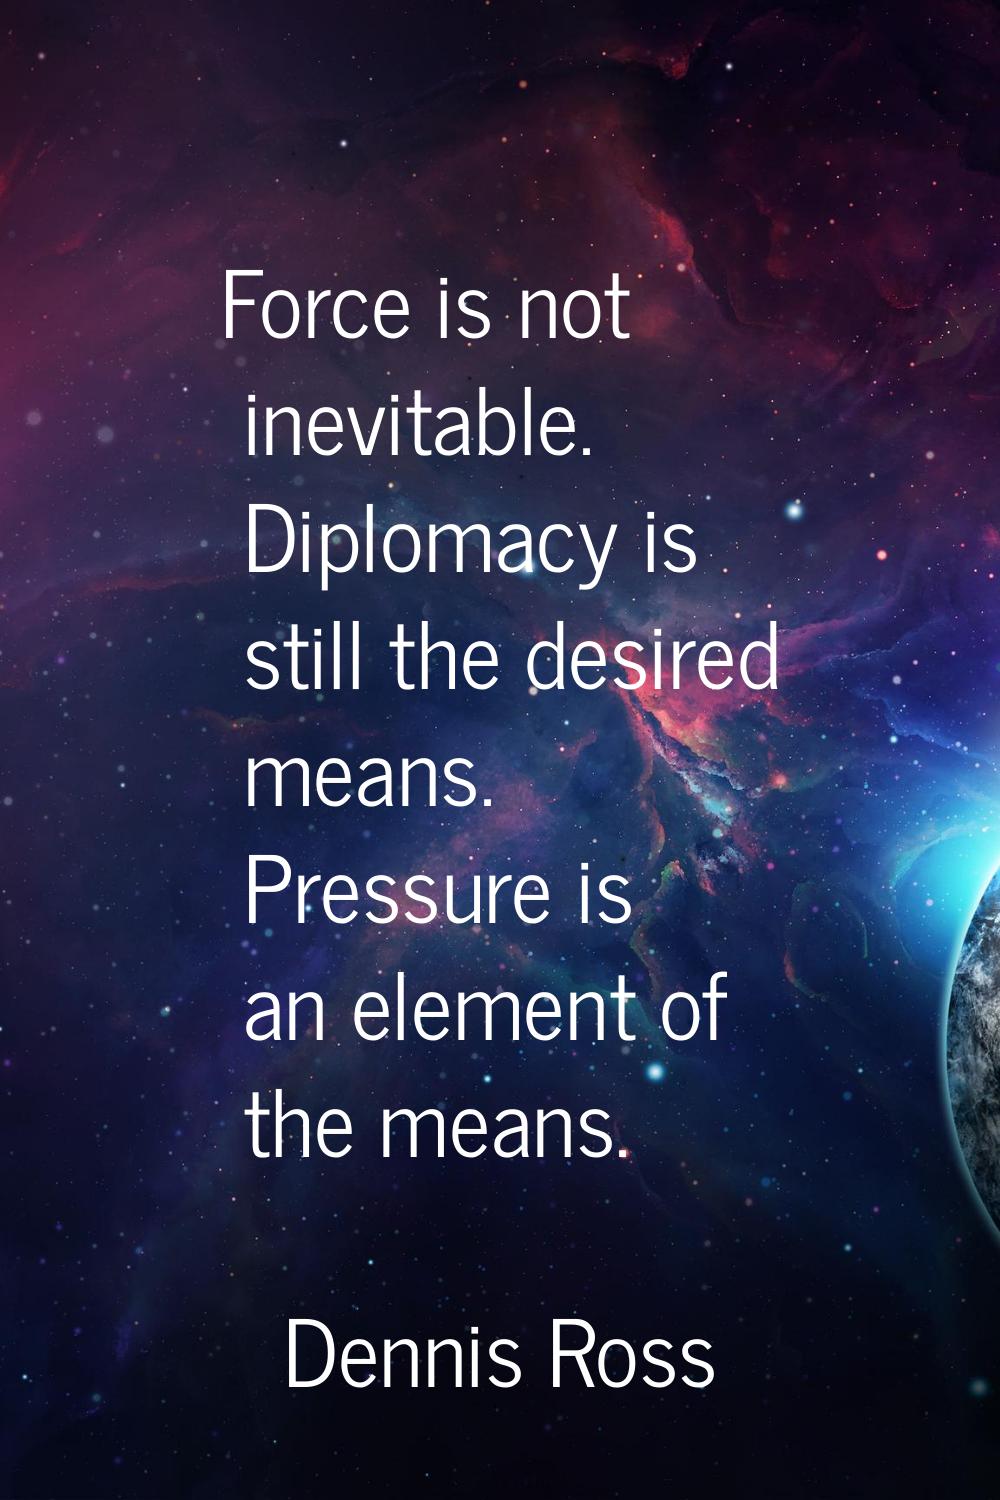 Force is not inevitable. Diplomacy is still the desired means. Pressure is an element of the means.